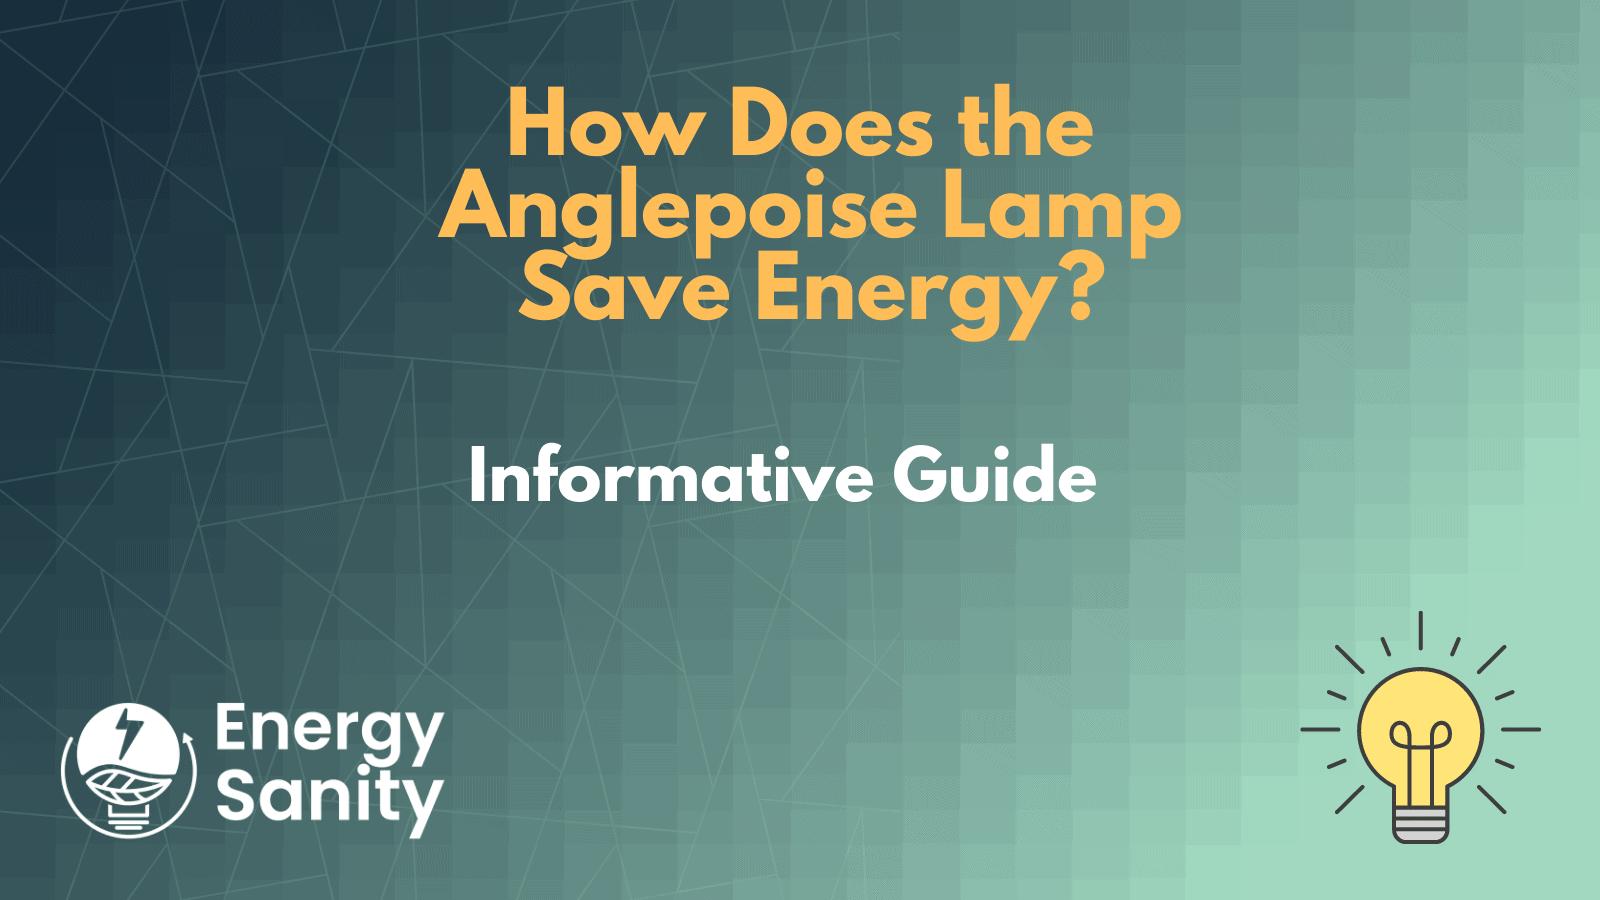 How Does the Anglepoise Lamp Save Energy?